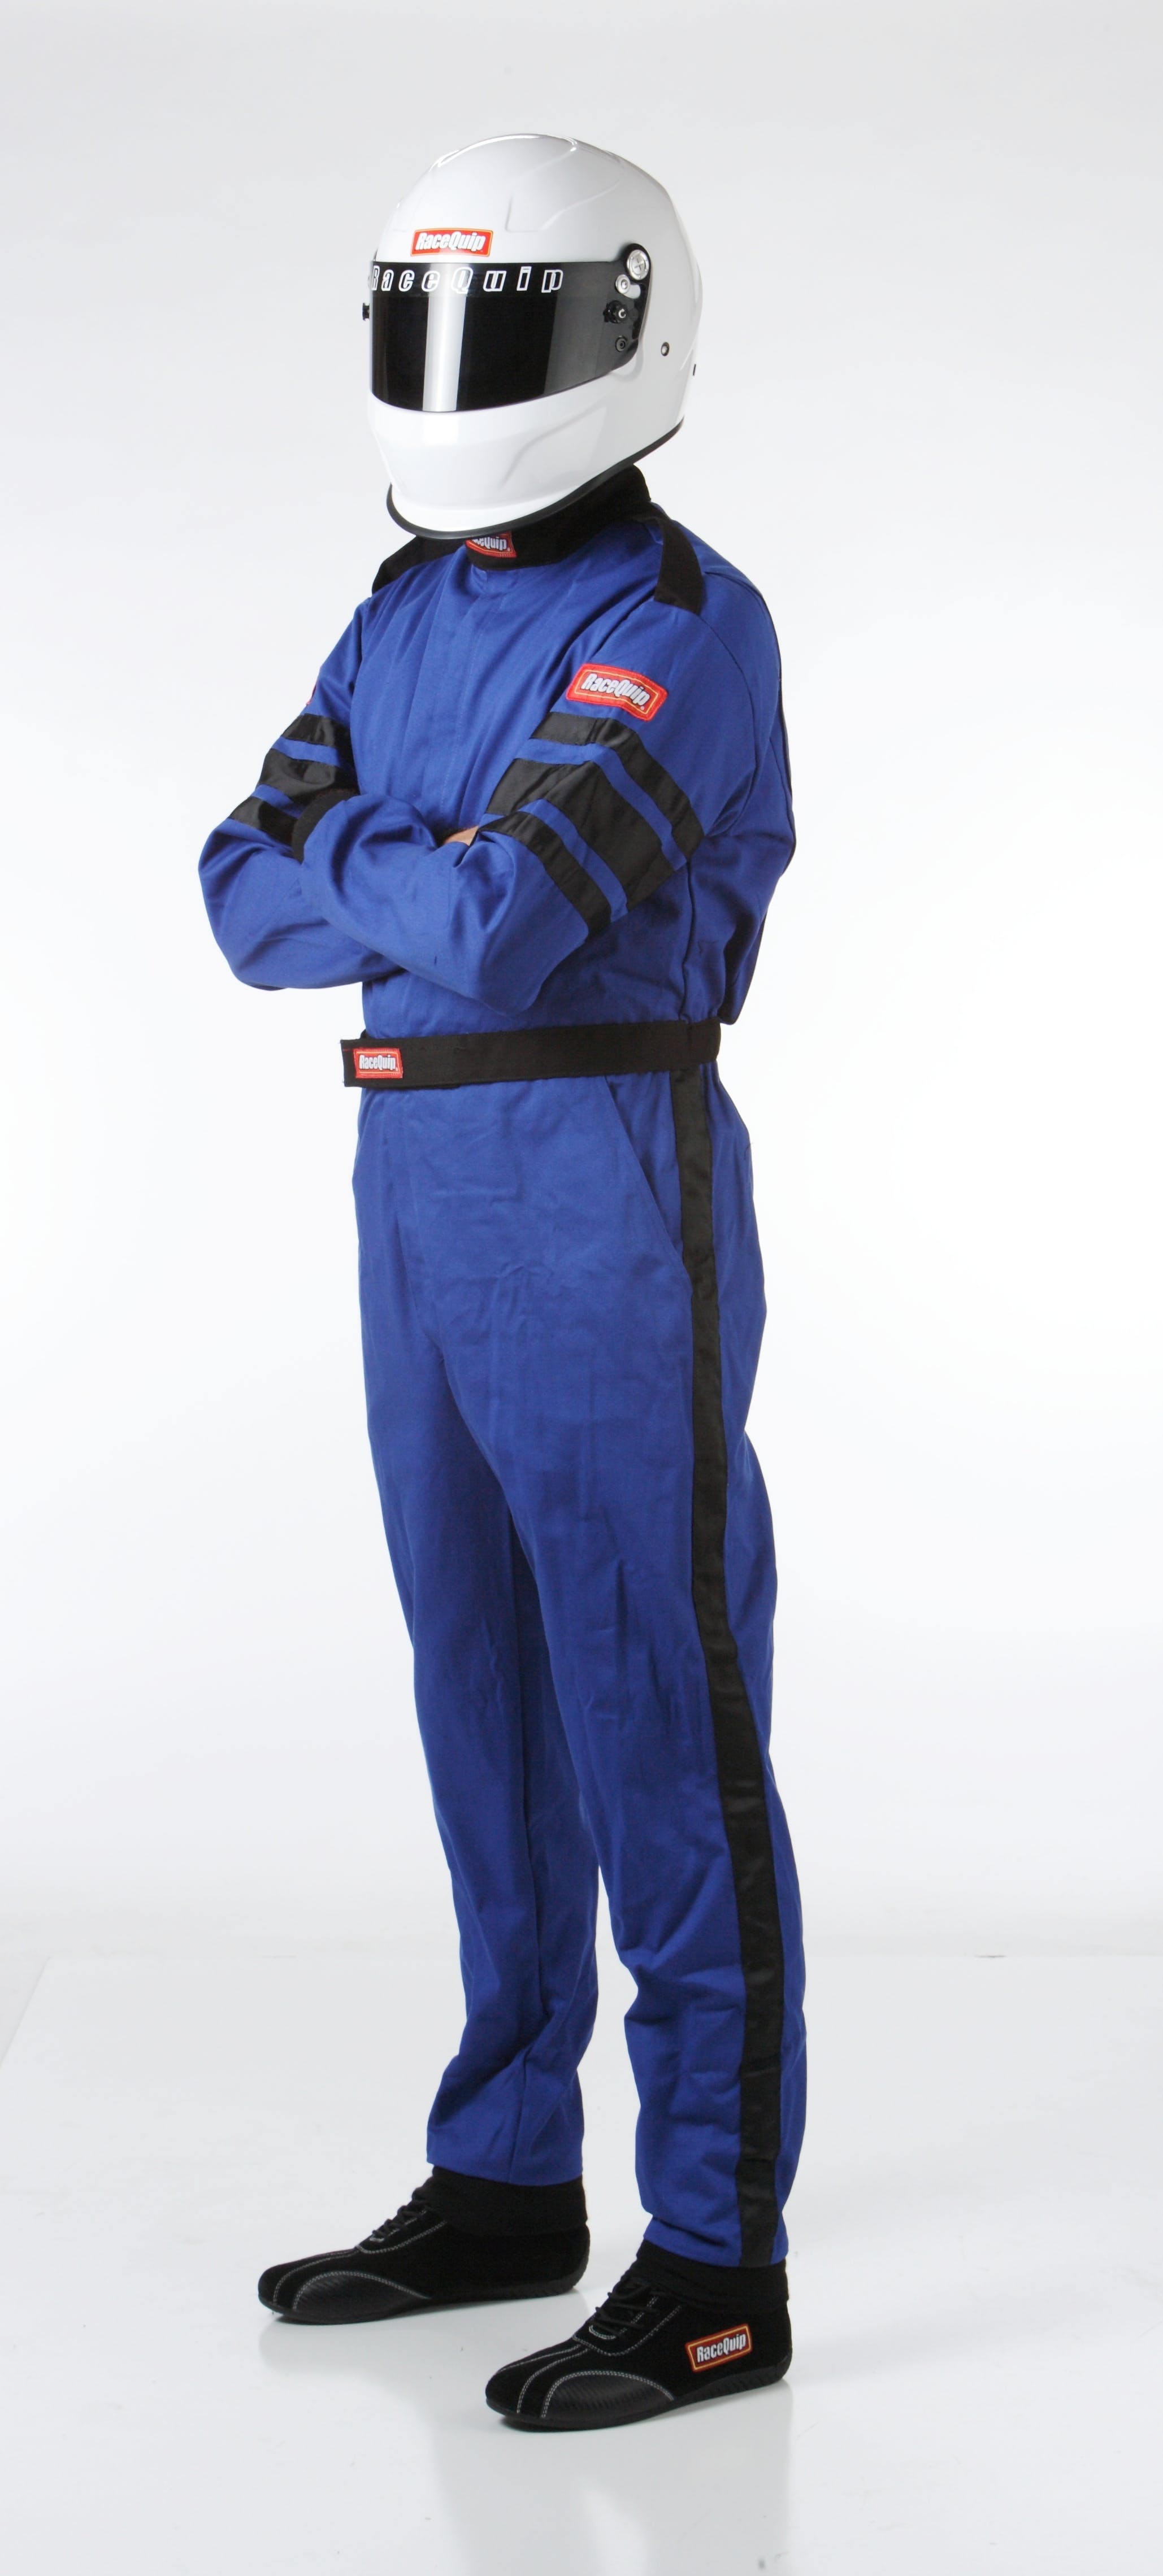 RaceQuip 110026 SFI-1 Pyrovatex One-Piece Single-Layer Racing Fire Suit (Blue, X-Large)